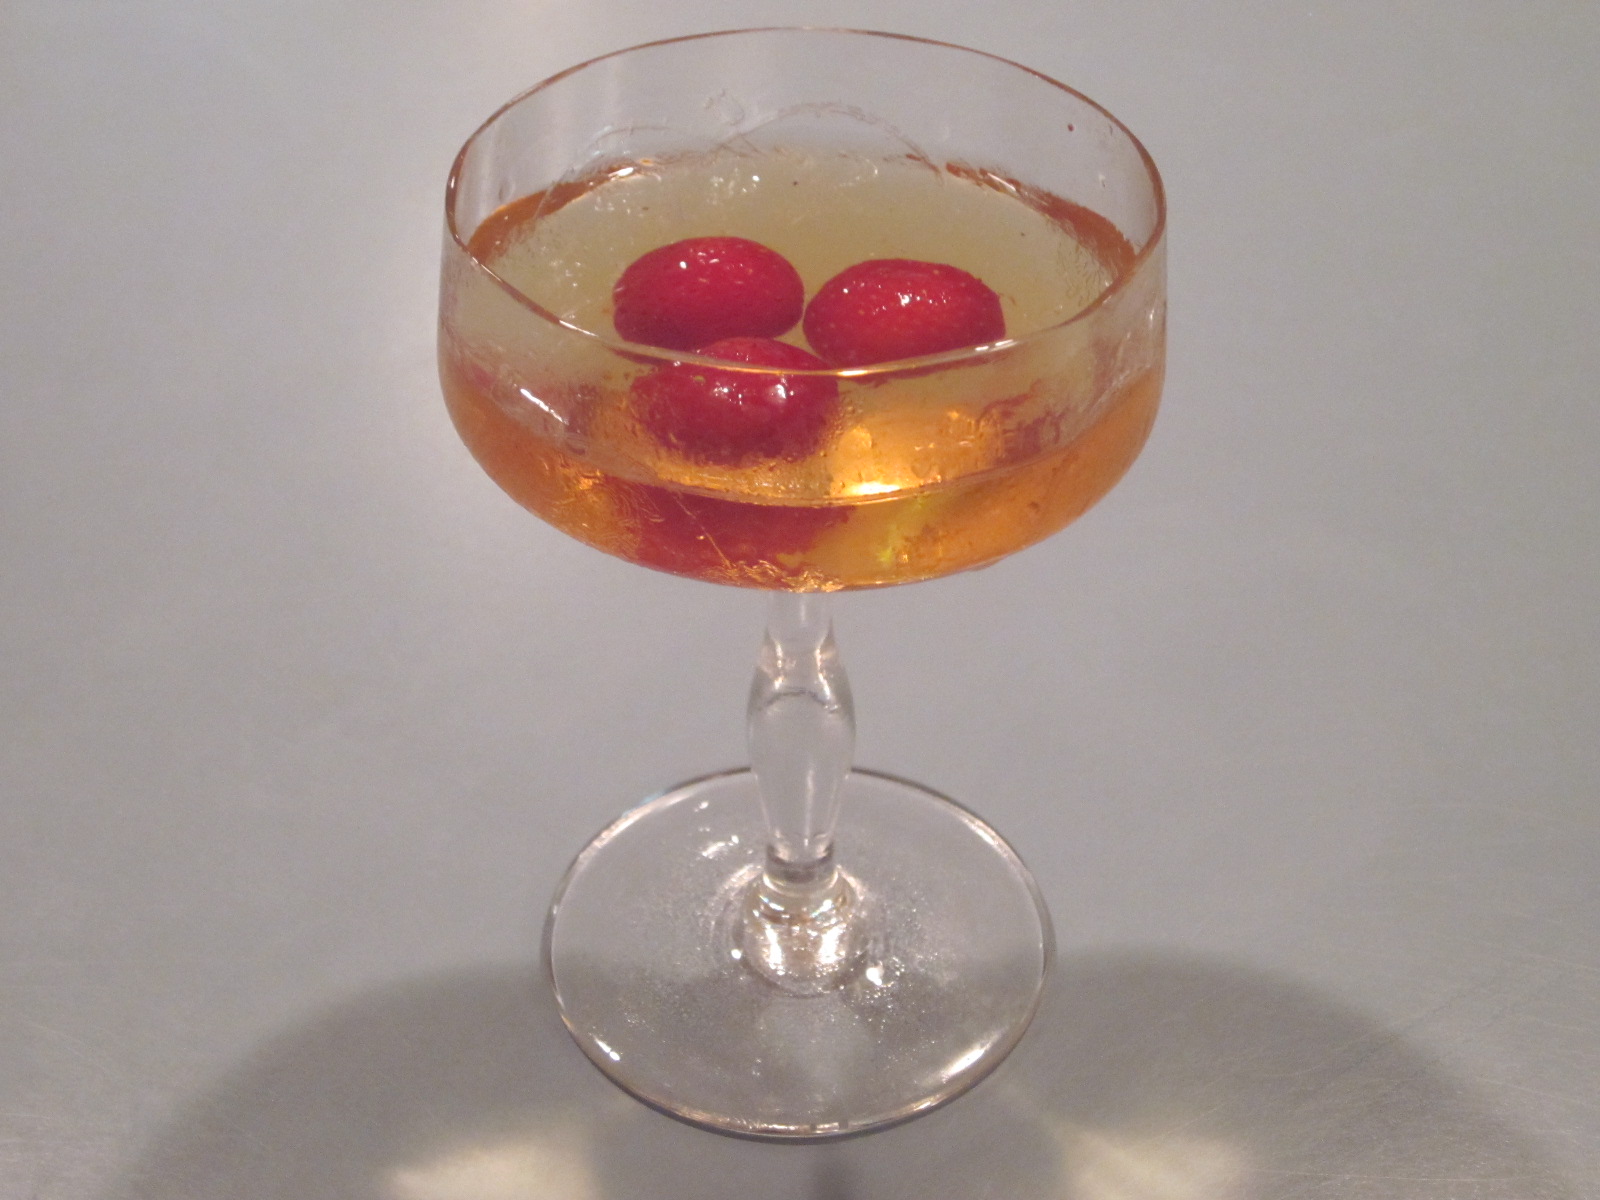 A Roma Cocktail made with Silo Gin from Vermont